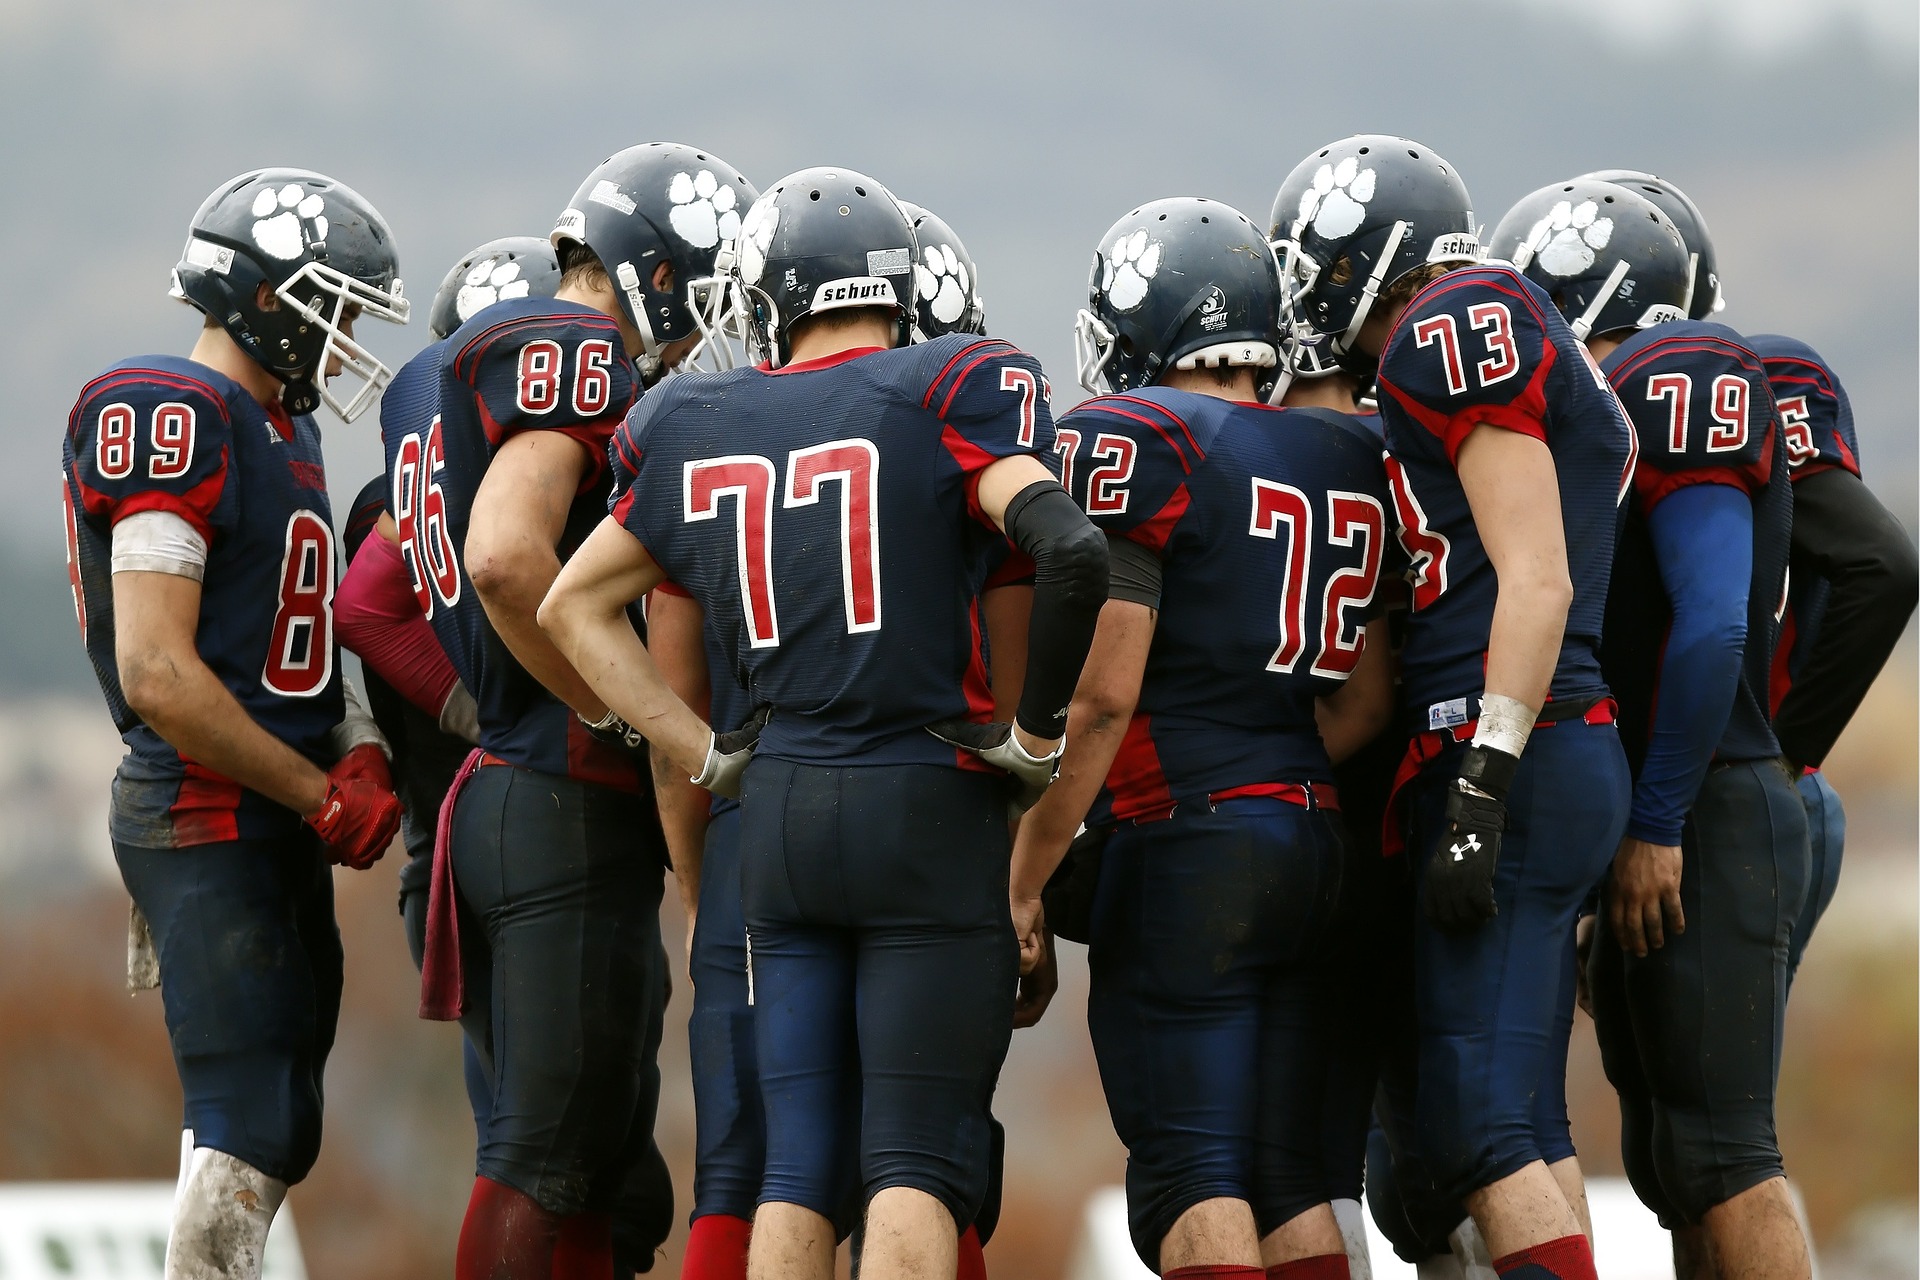 Former Bolton Student Achieves Incredible Feat: Representing Great Britain In American Football